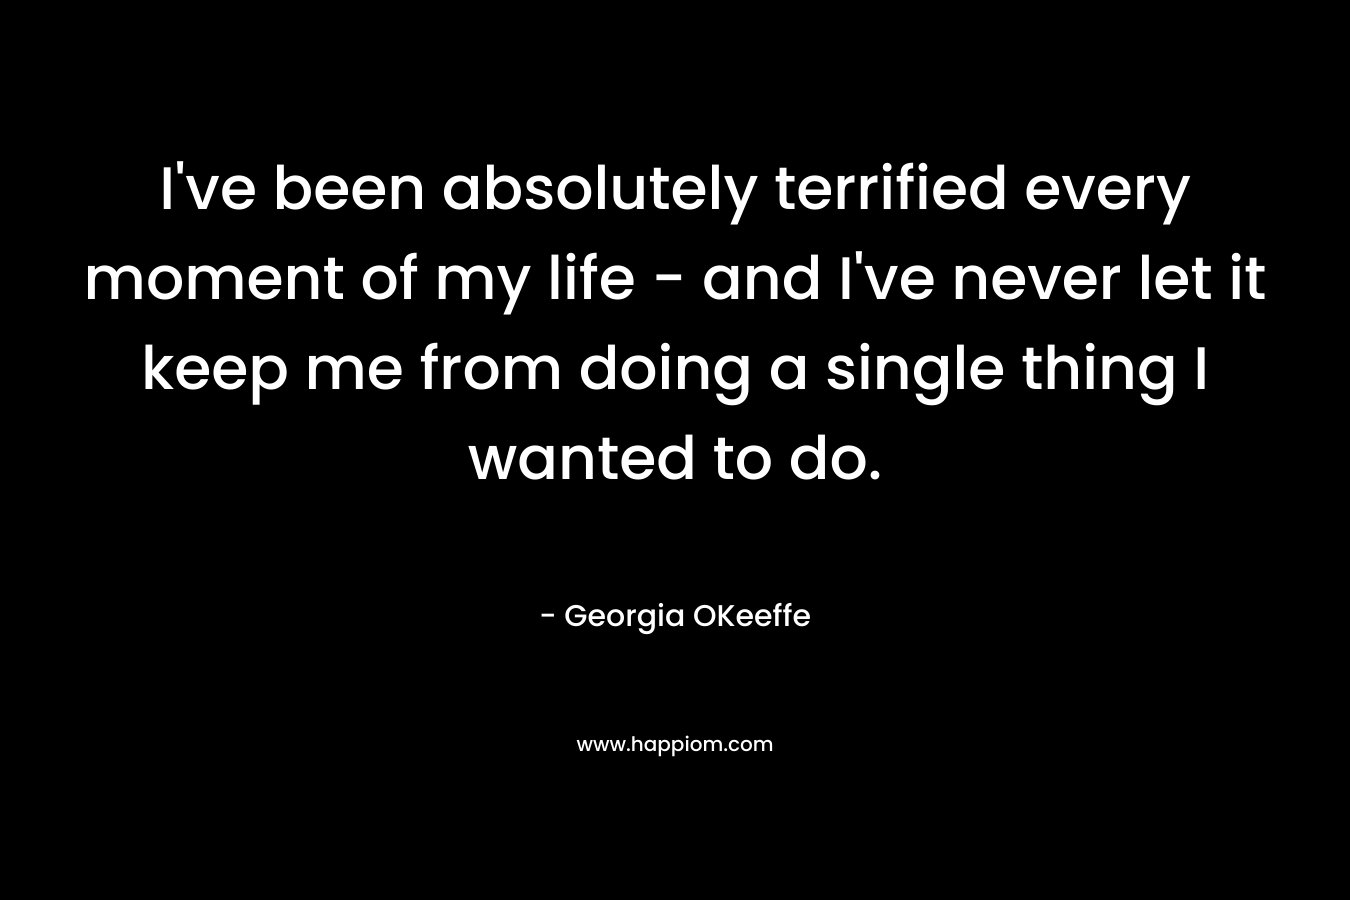 I’ve been absolutely terrified every moment of my life – and I’ve never let it keep me from doing a single thing I wanted to do. – Georgia OKeeffe